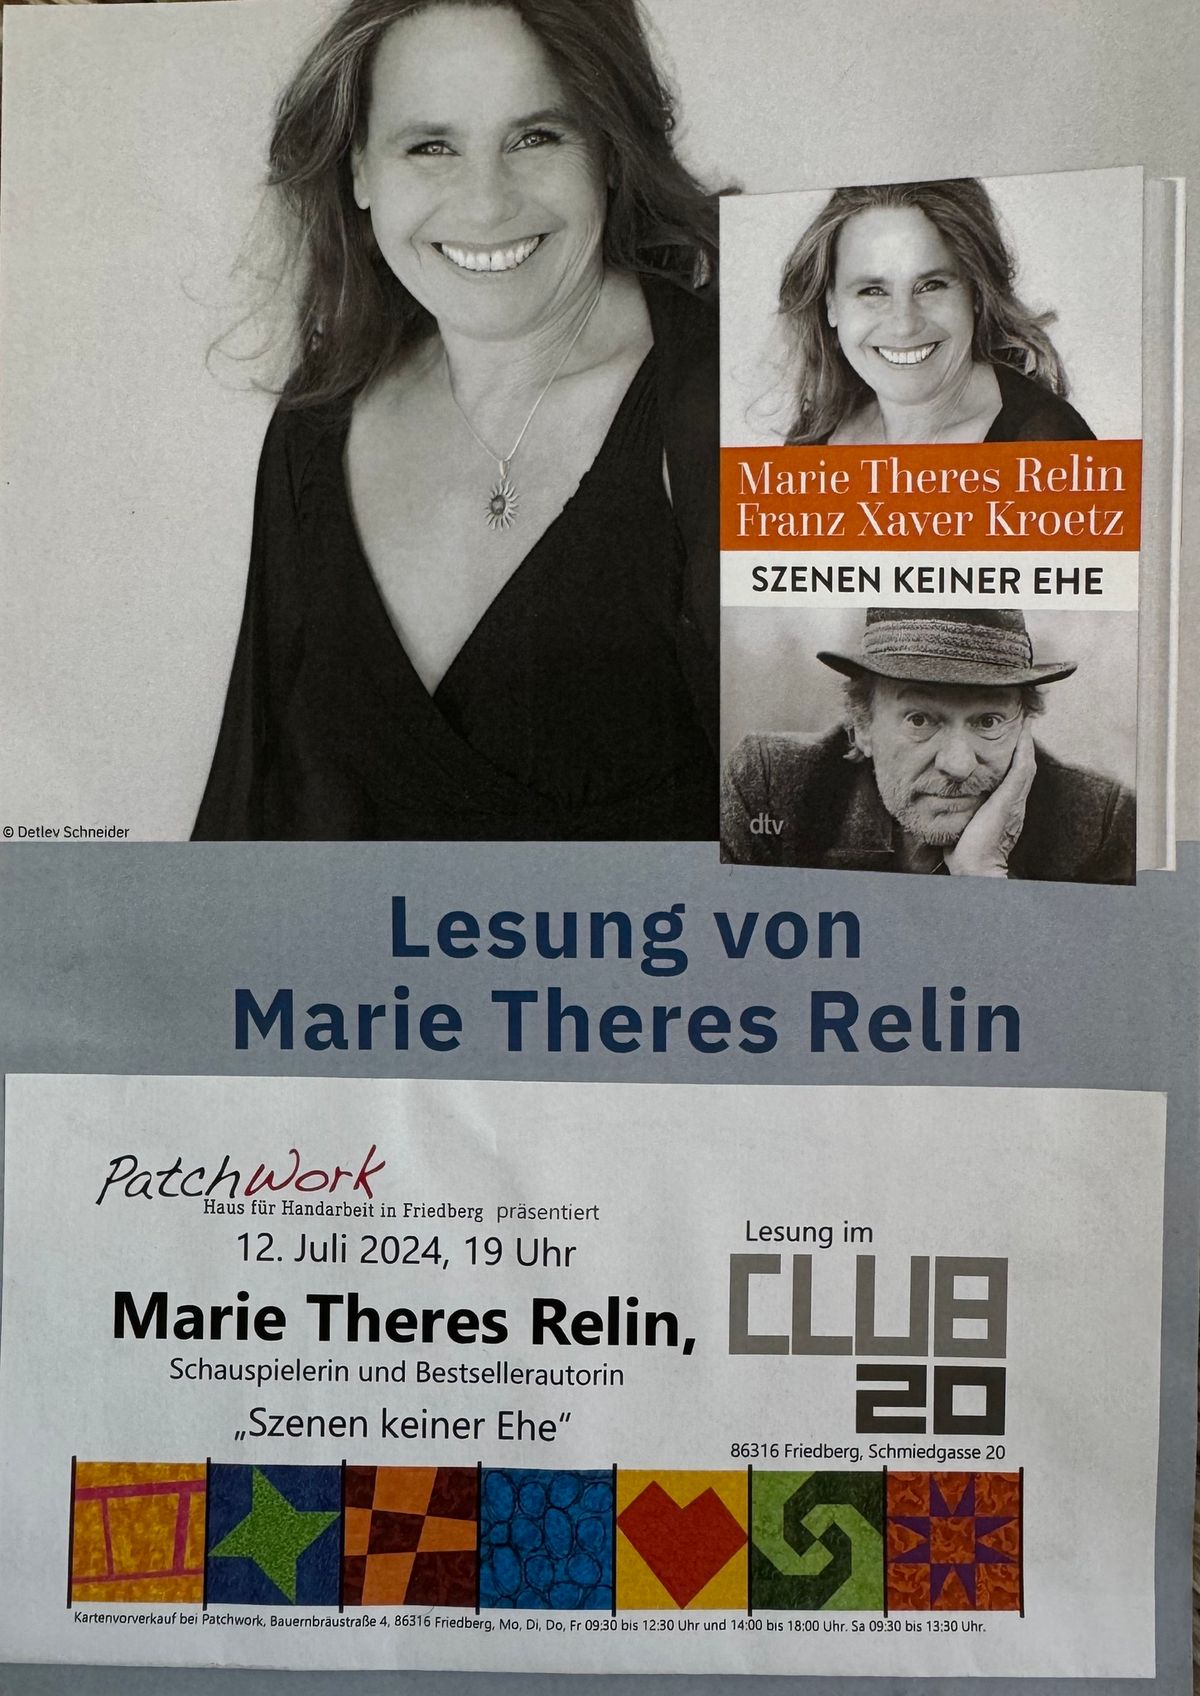 Lesung von Marie Theres Relin